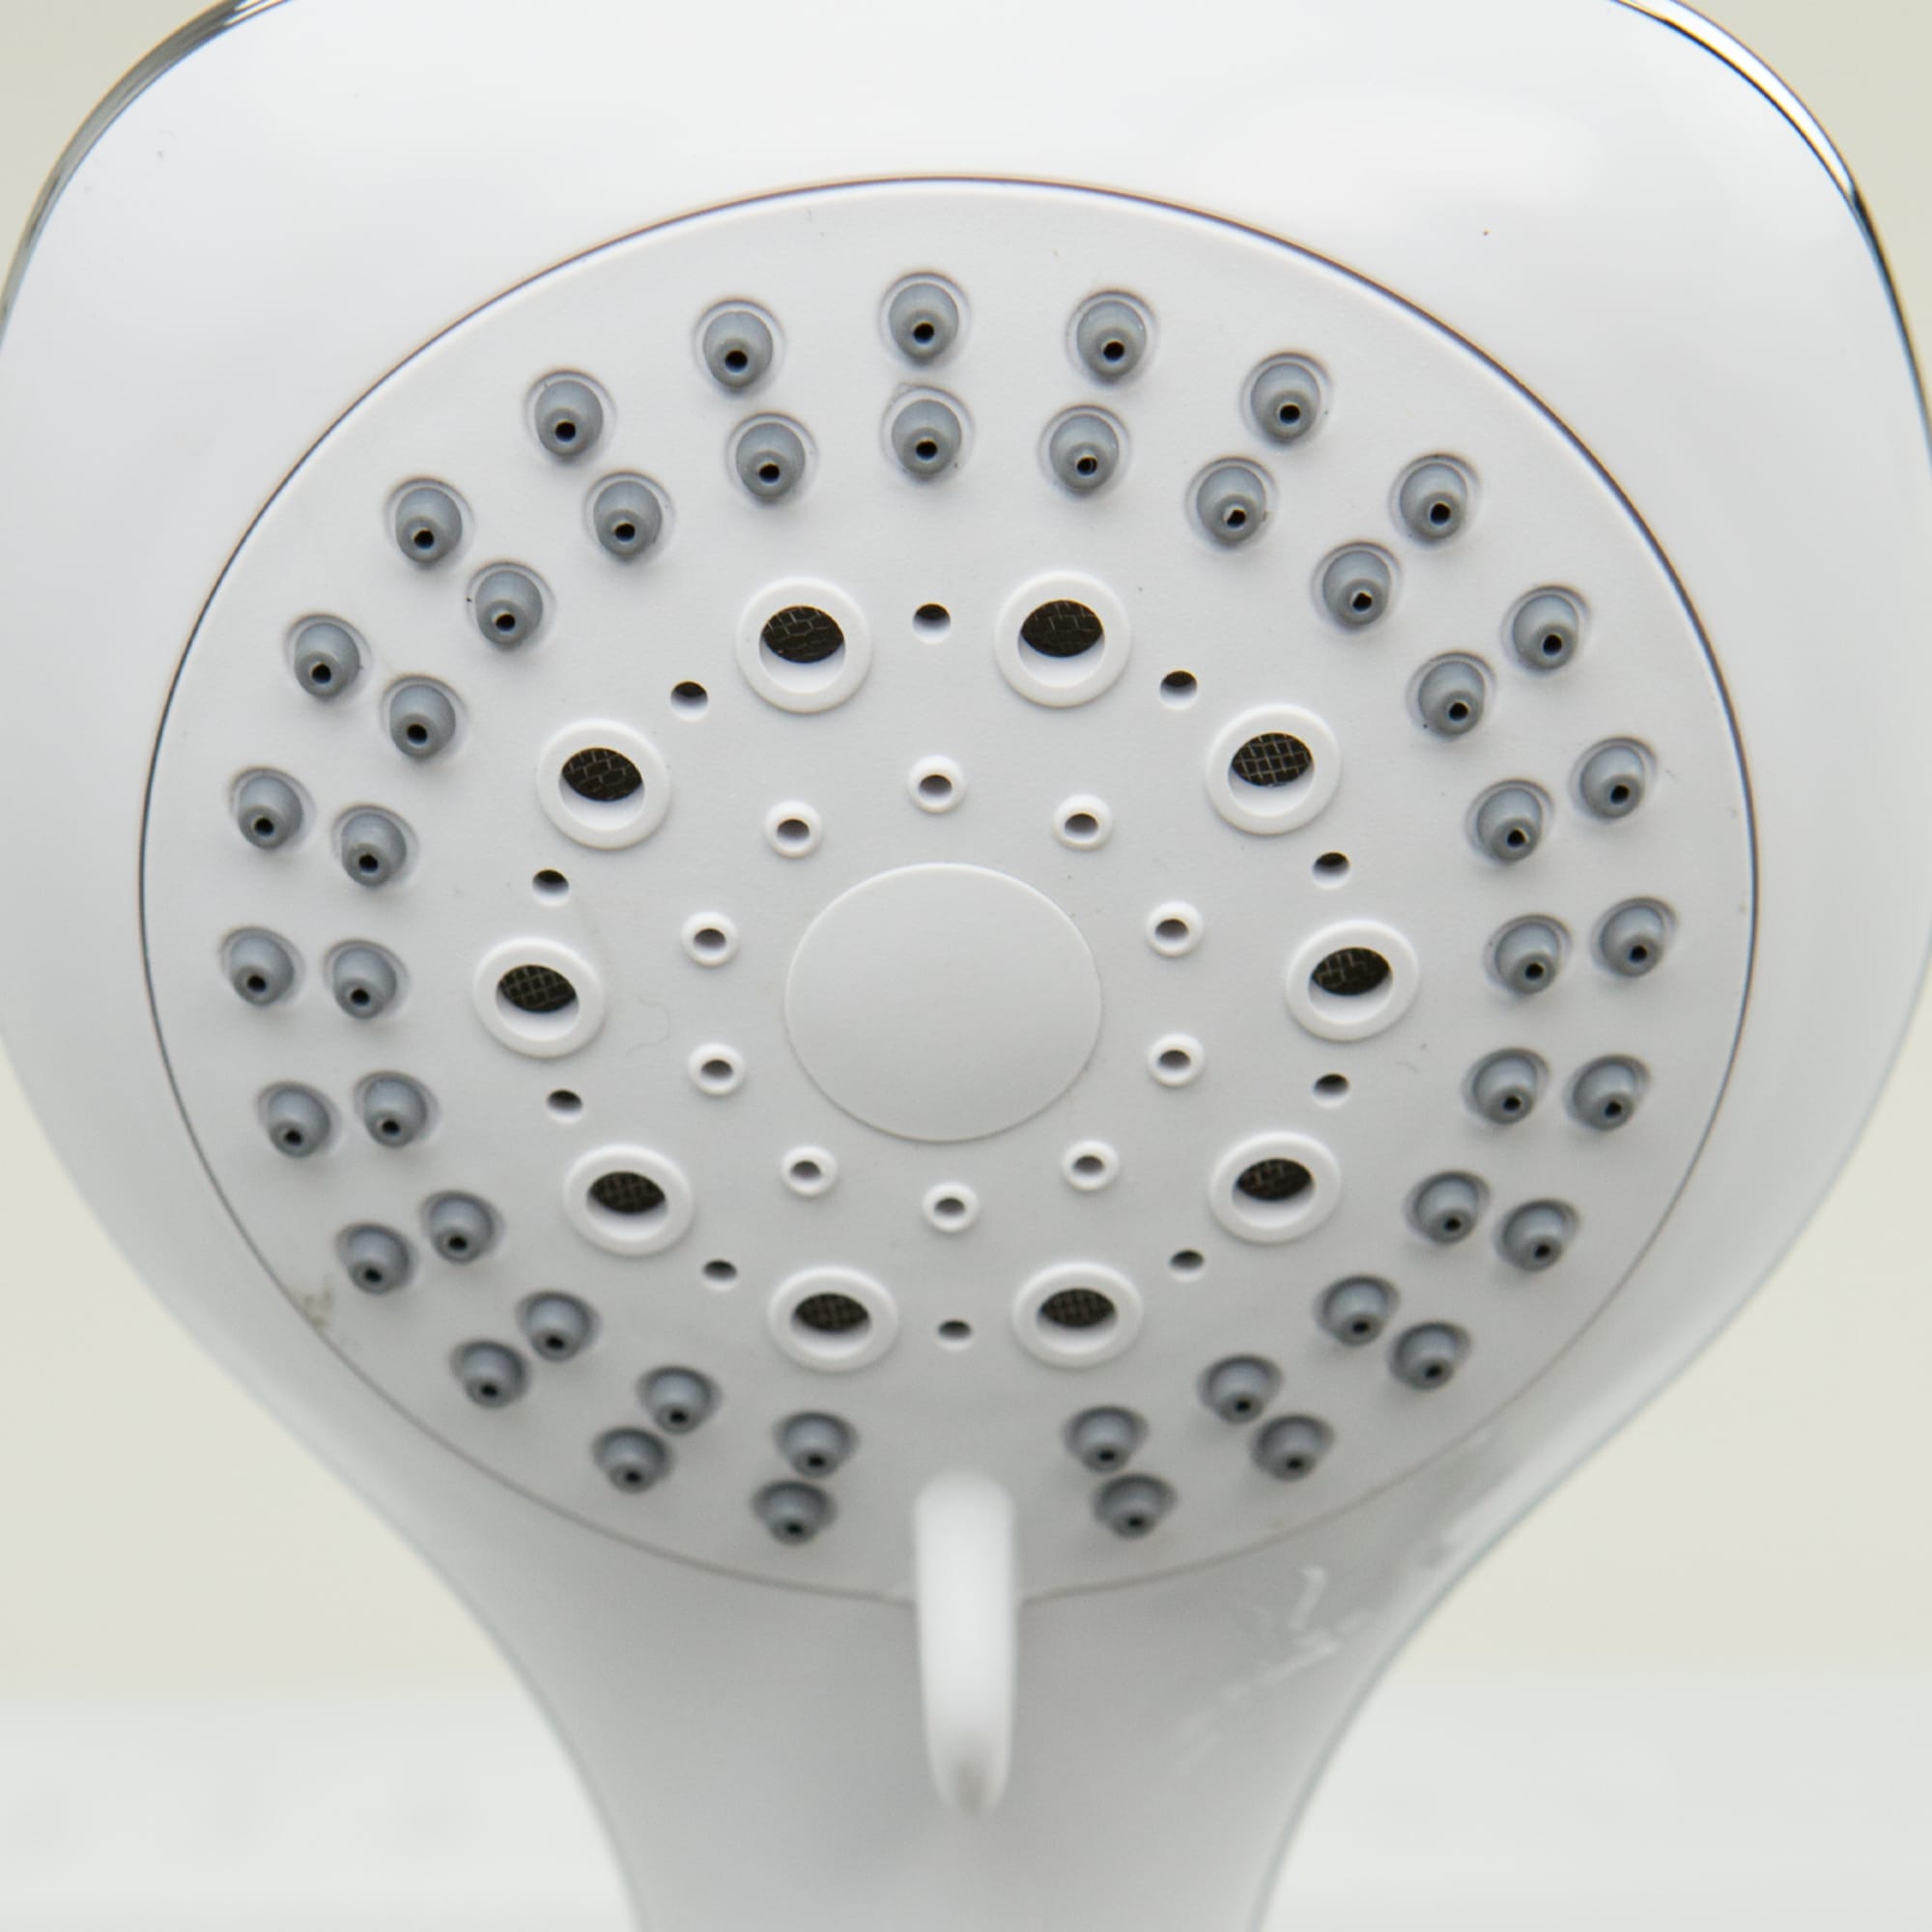 Home Basics Dual Shower Massager with Rainfall Head Set, Chrome $20.00 EACH, CASE PACK OF 6